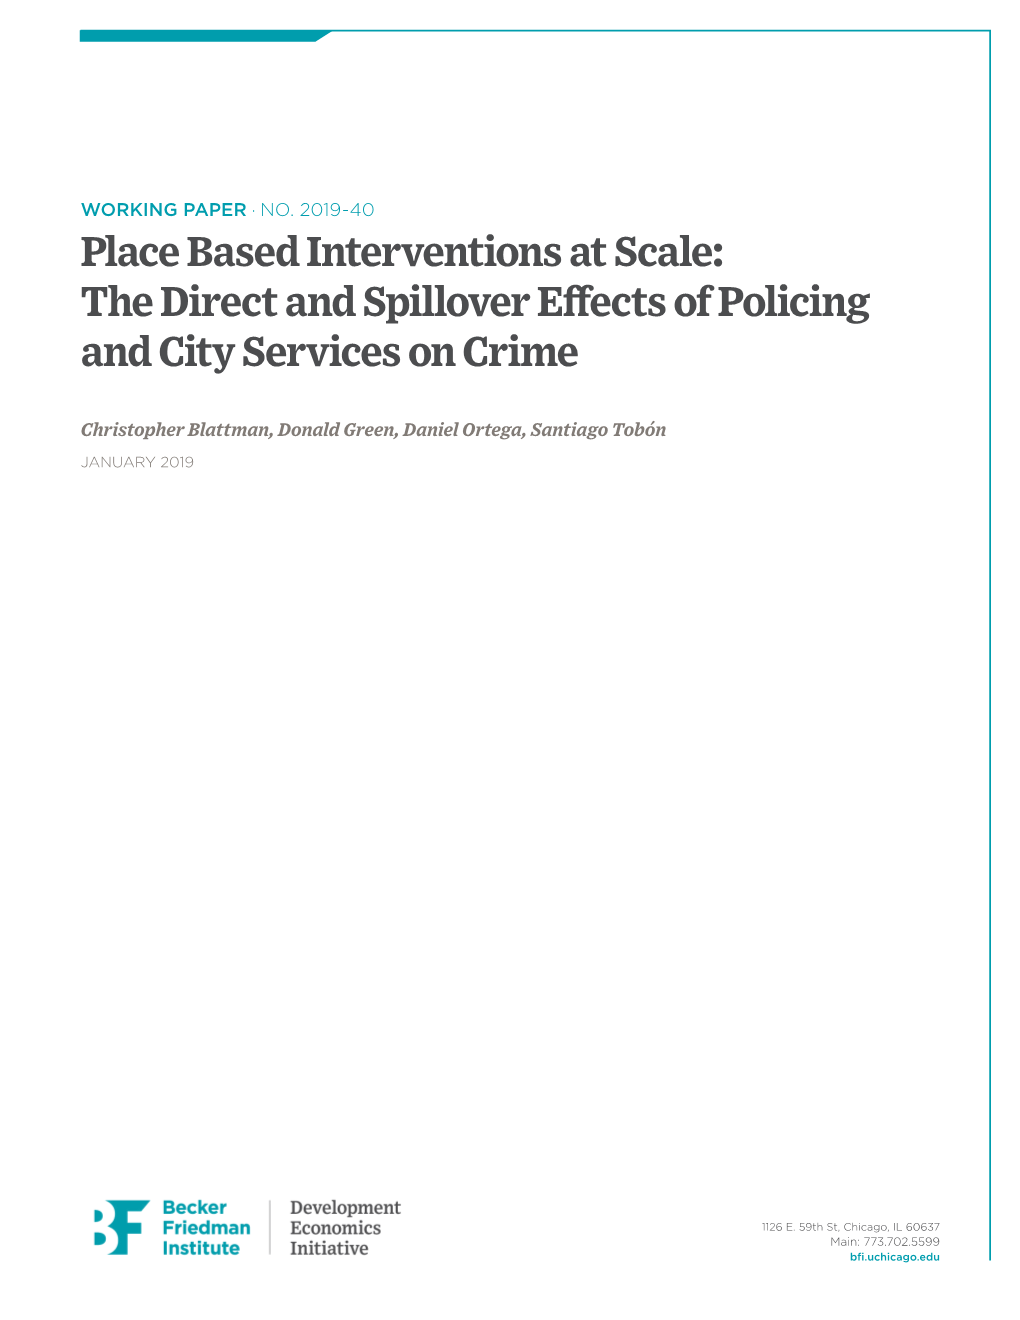 Place Based Interventions at Scale: the Direct and Spillover Effects of Policing and City Services on Crime